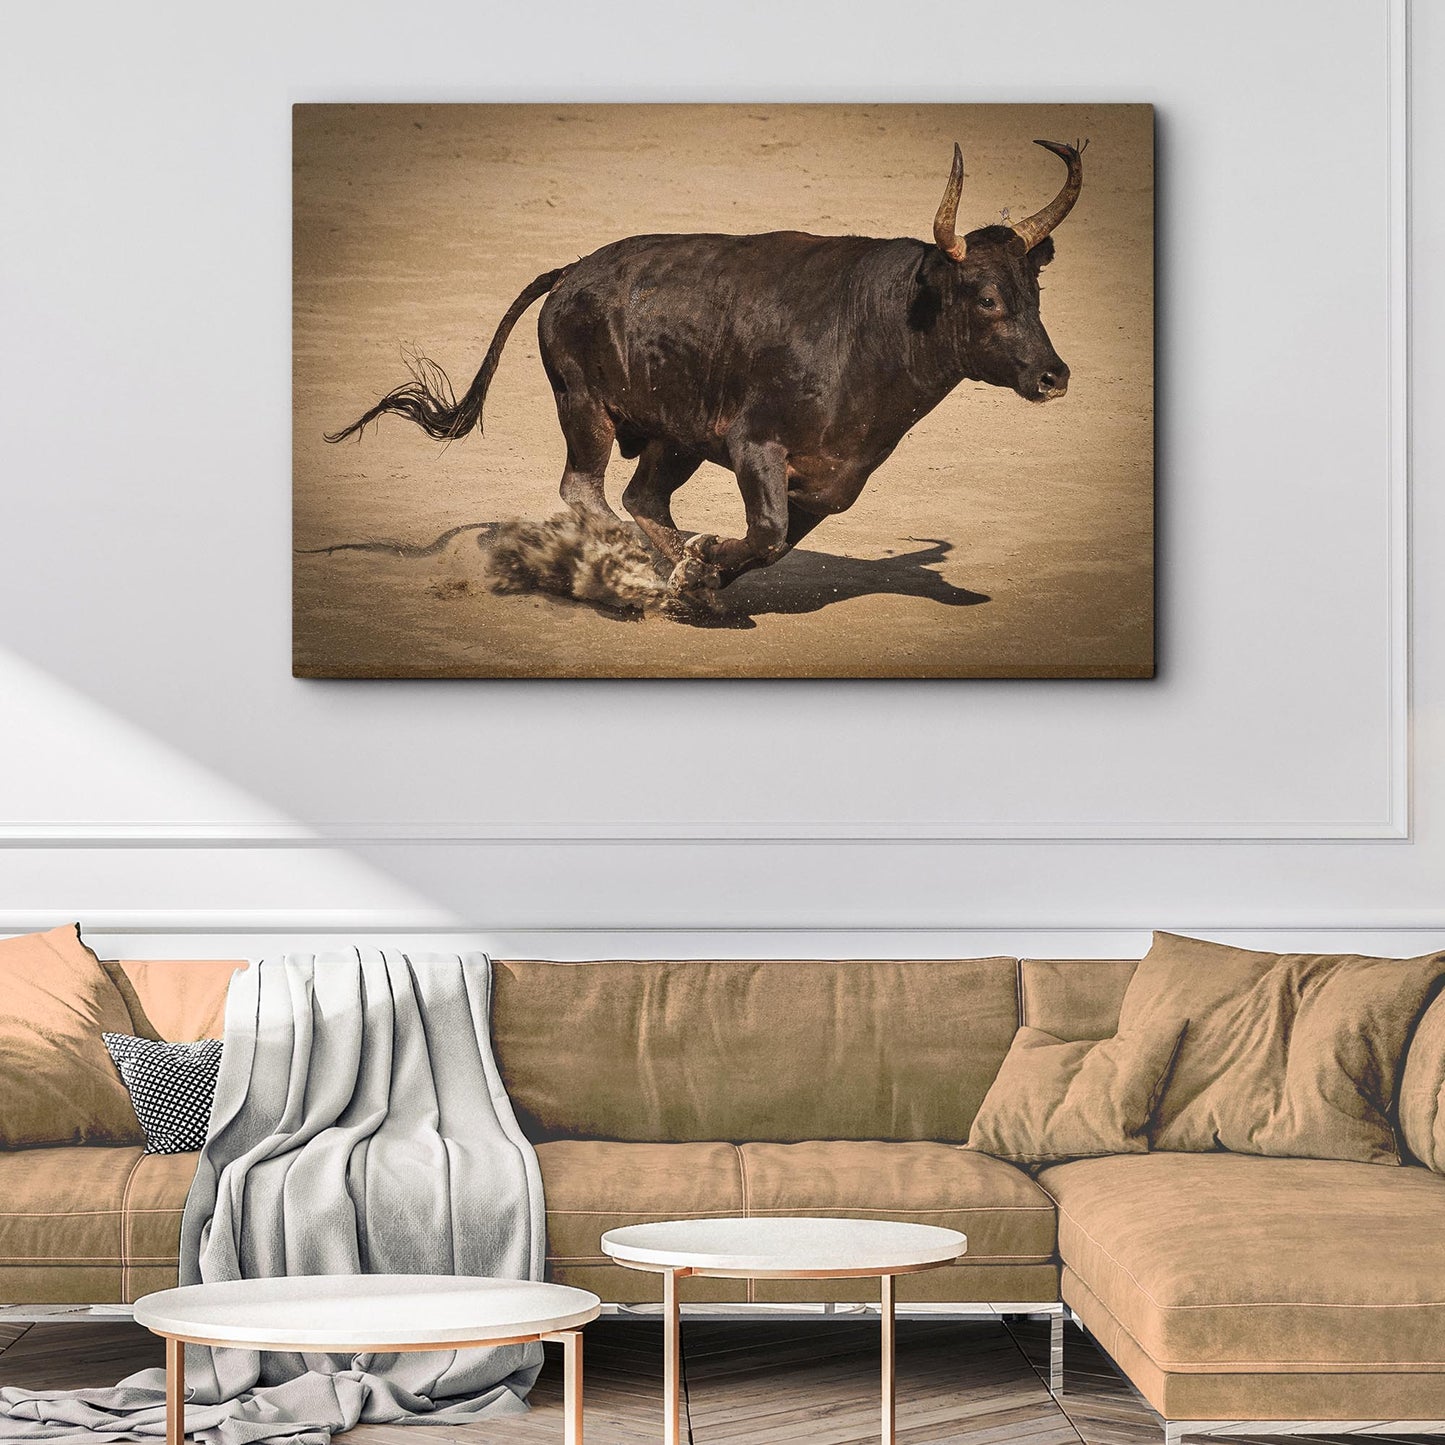 Charging Bull Canvas Wall Art - Image by Tailored Canvases